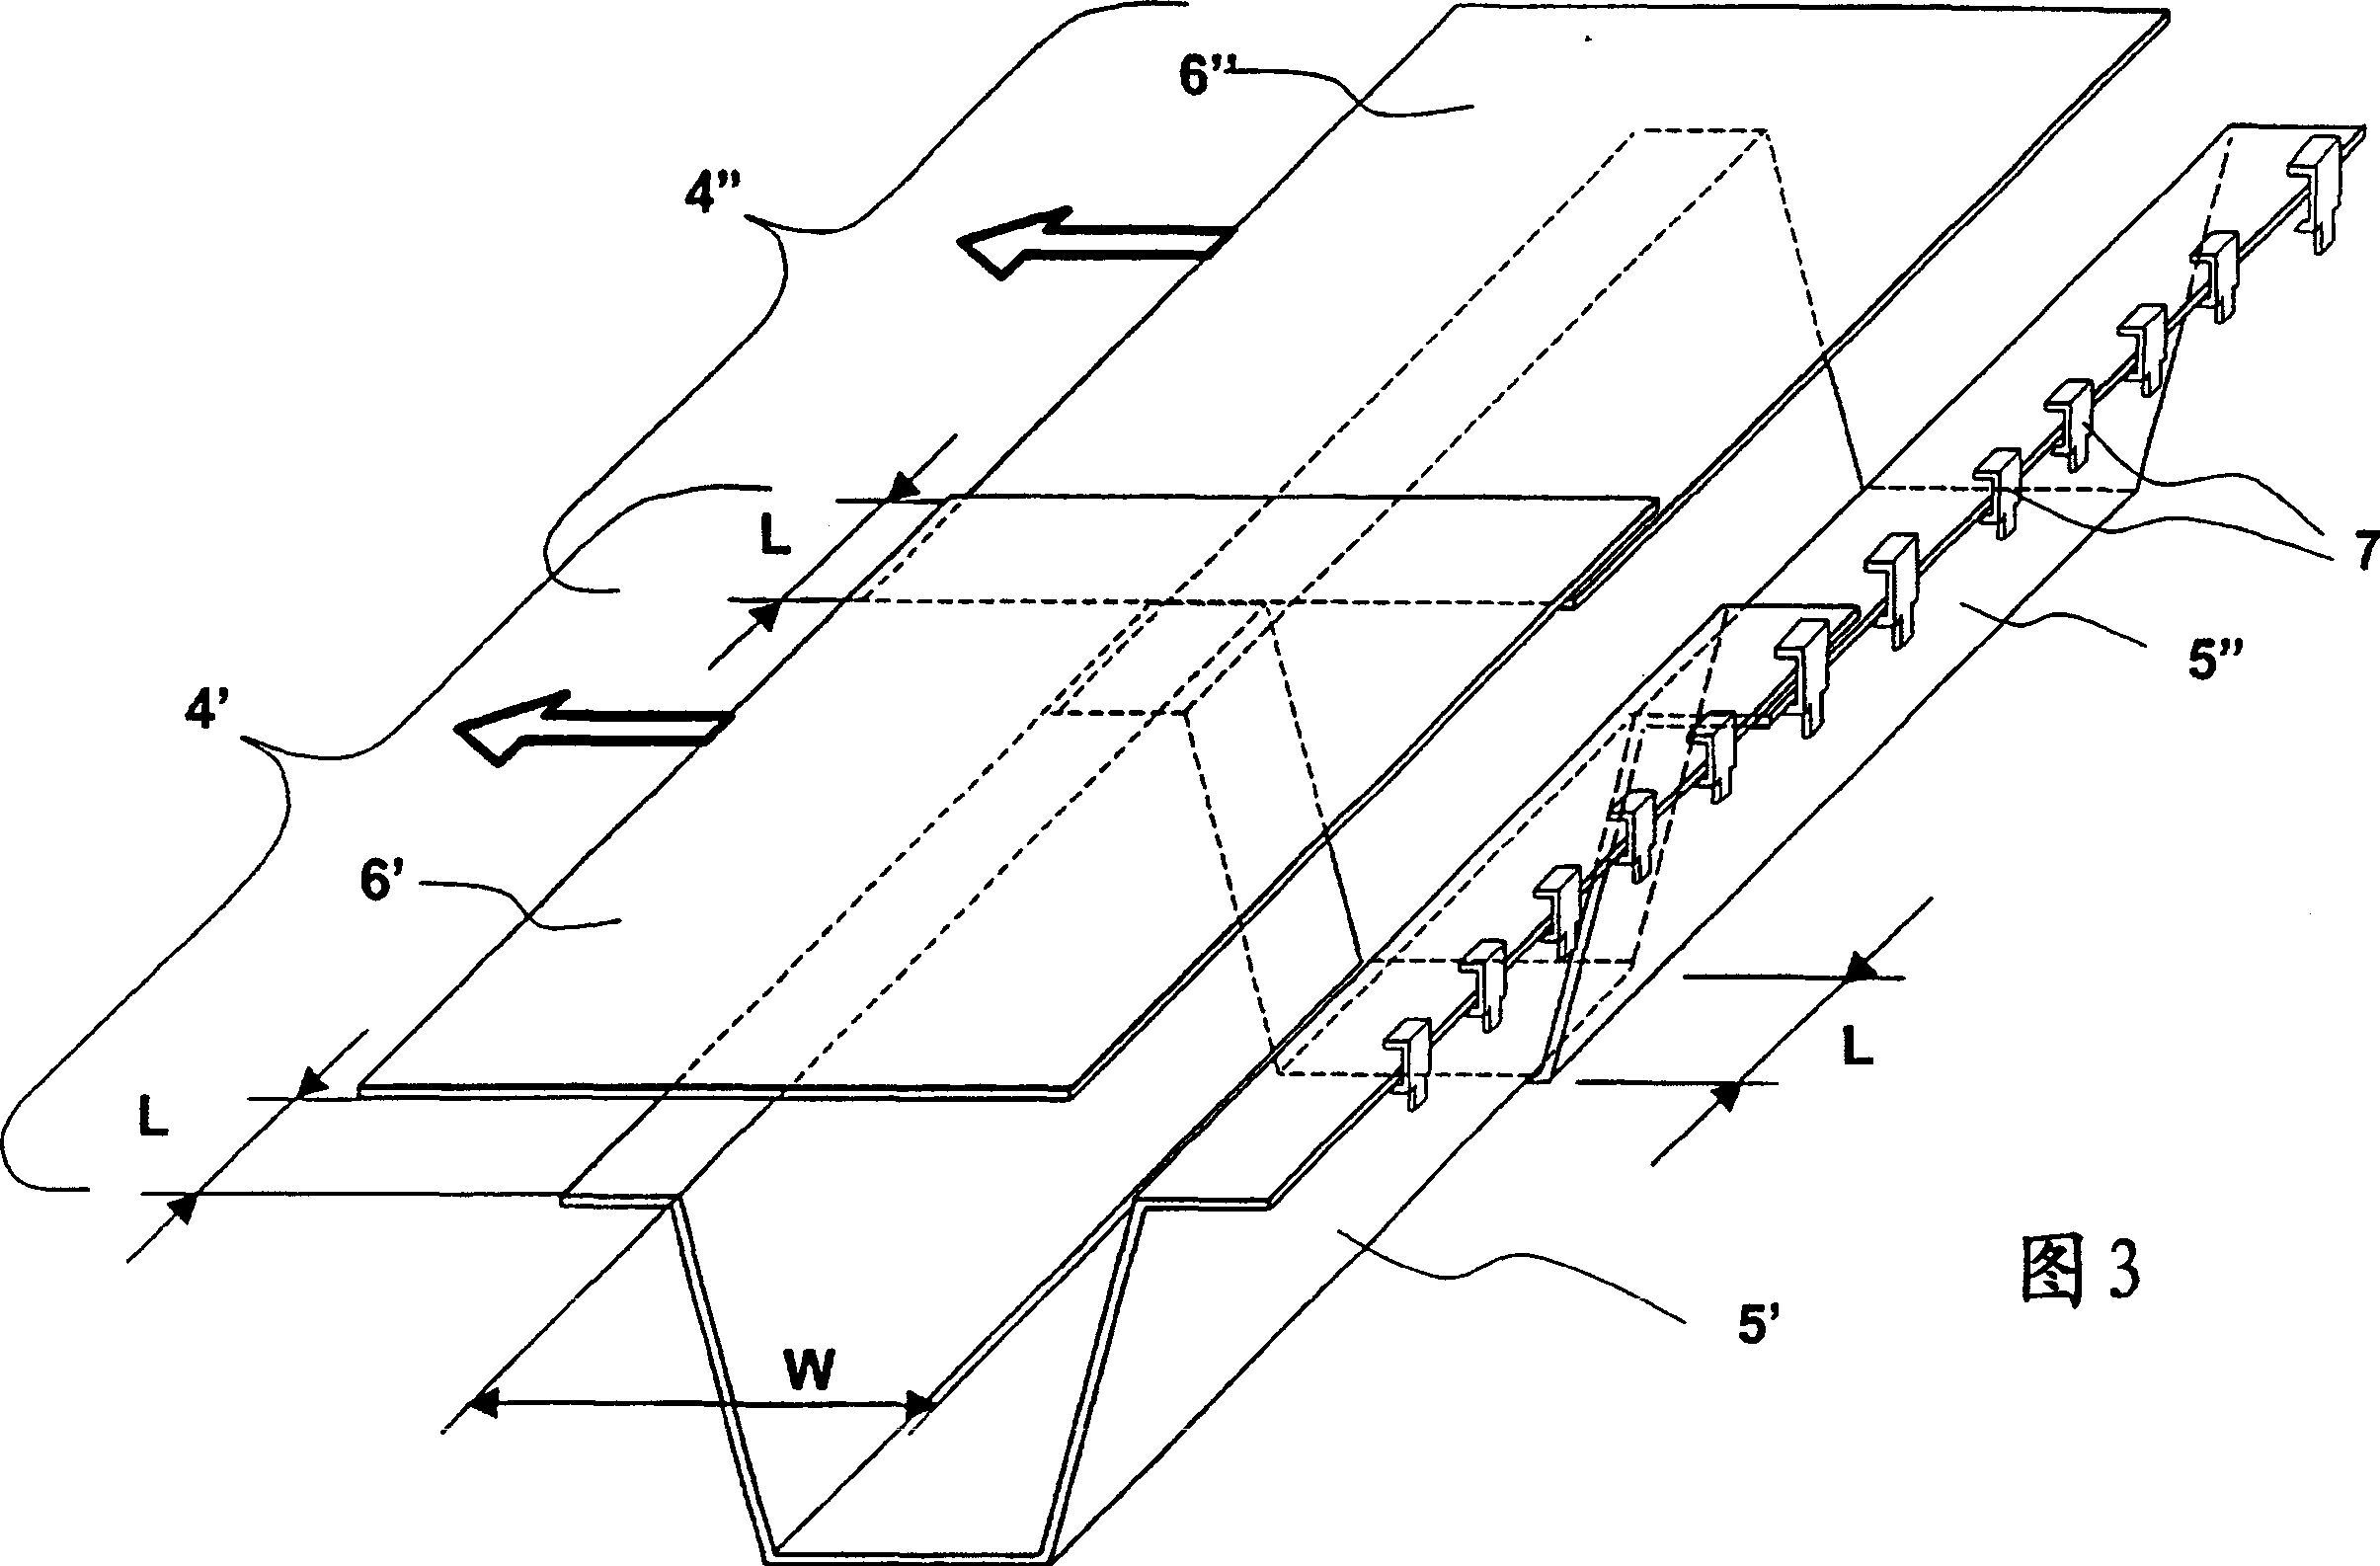 Method for screening magnetic field generated by electrical power transmission line and electrical power transmission line so screened